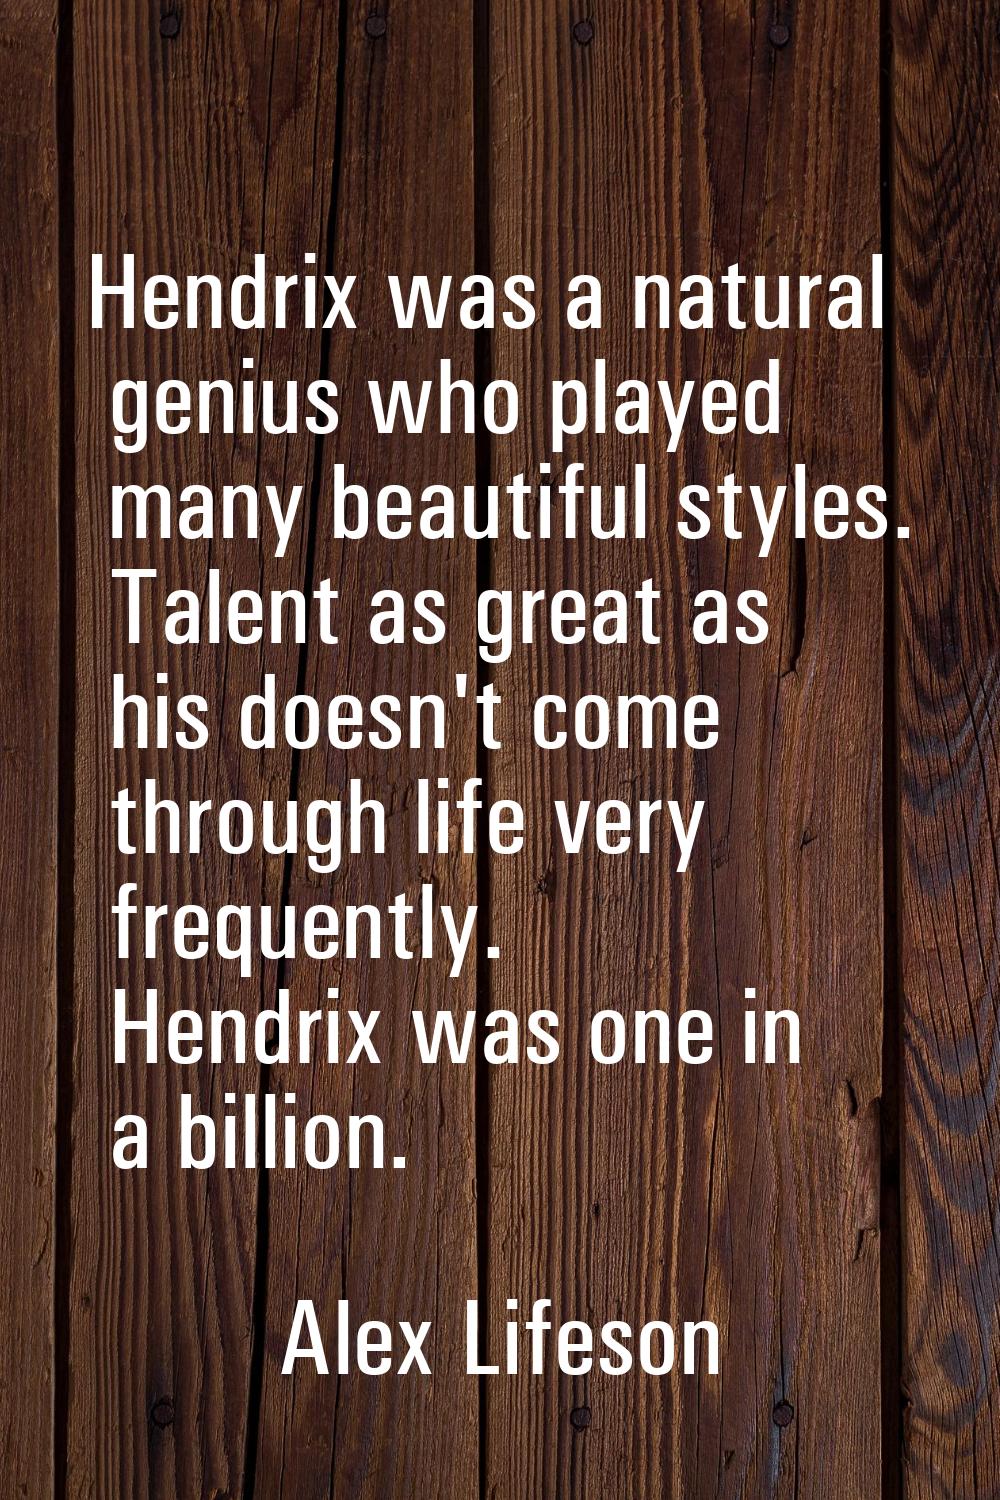 Hendrix was a natural genius who played many beautiful styles. Talent as great as his doesn't come 